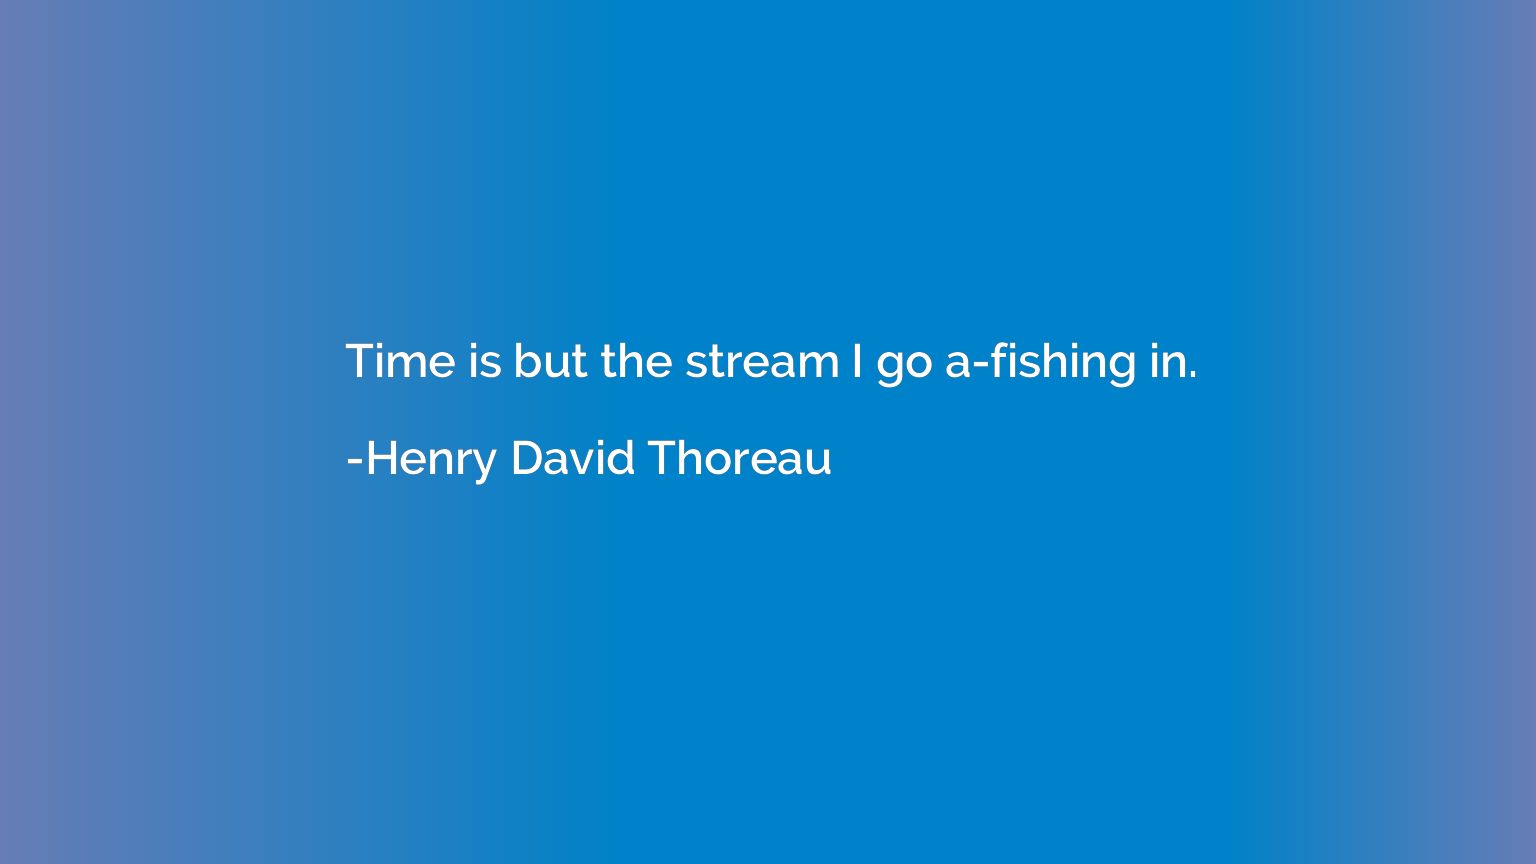 Time is but the stream I go a-fishing in.